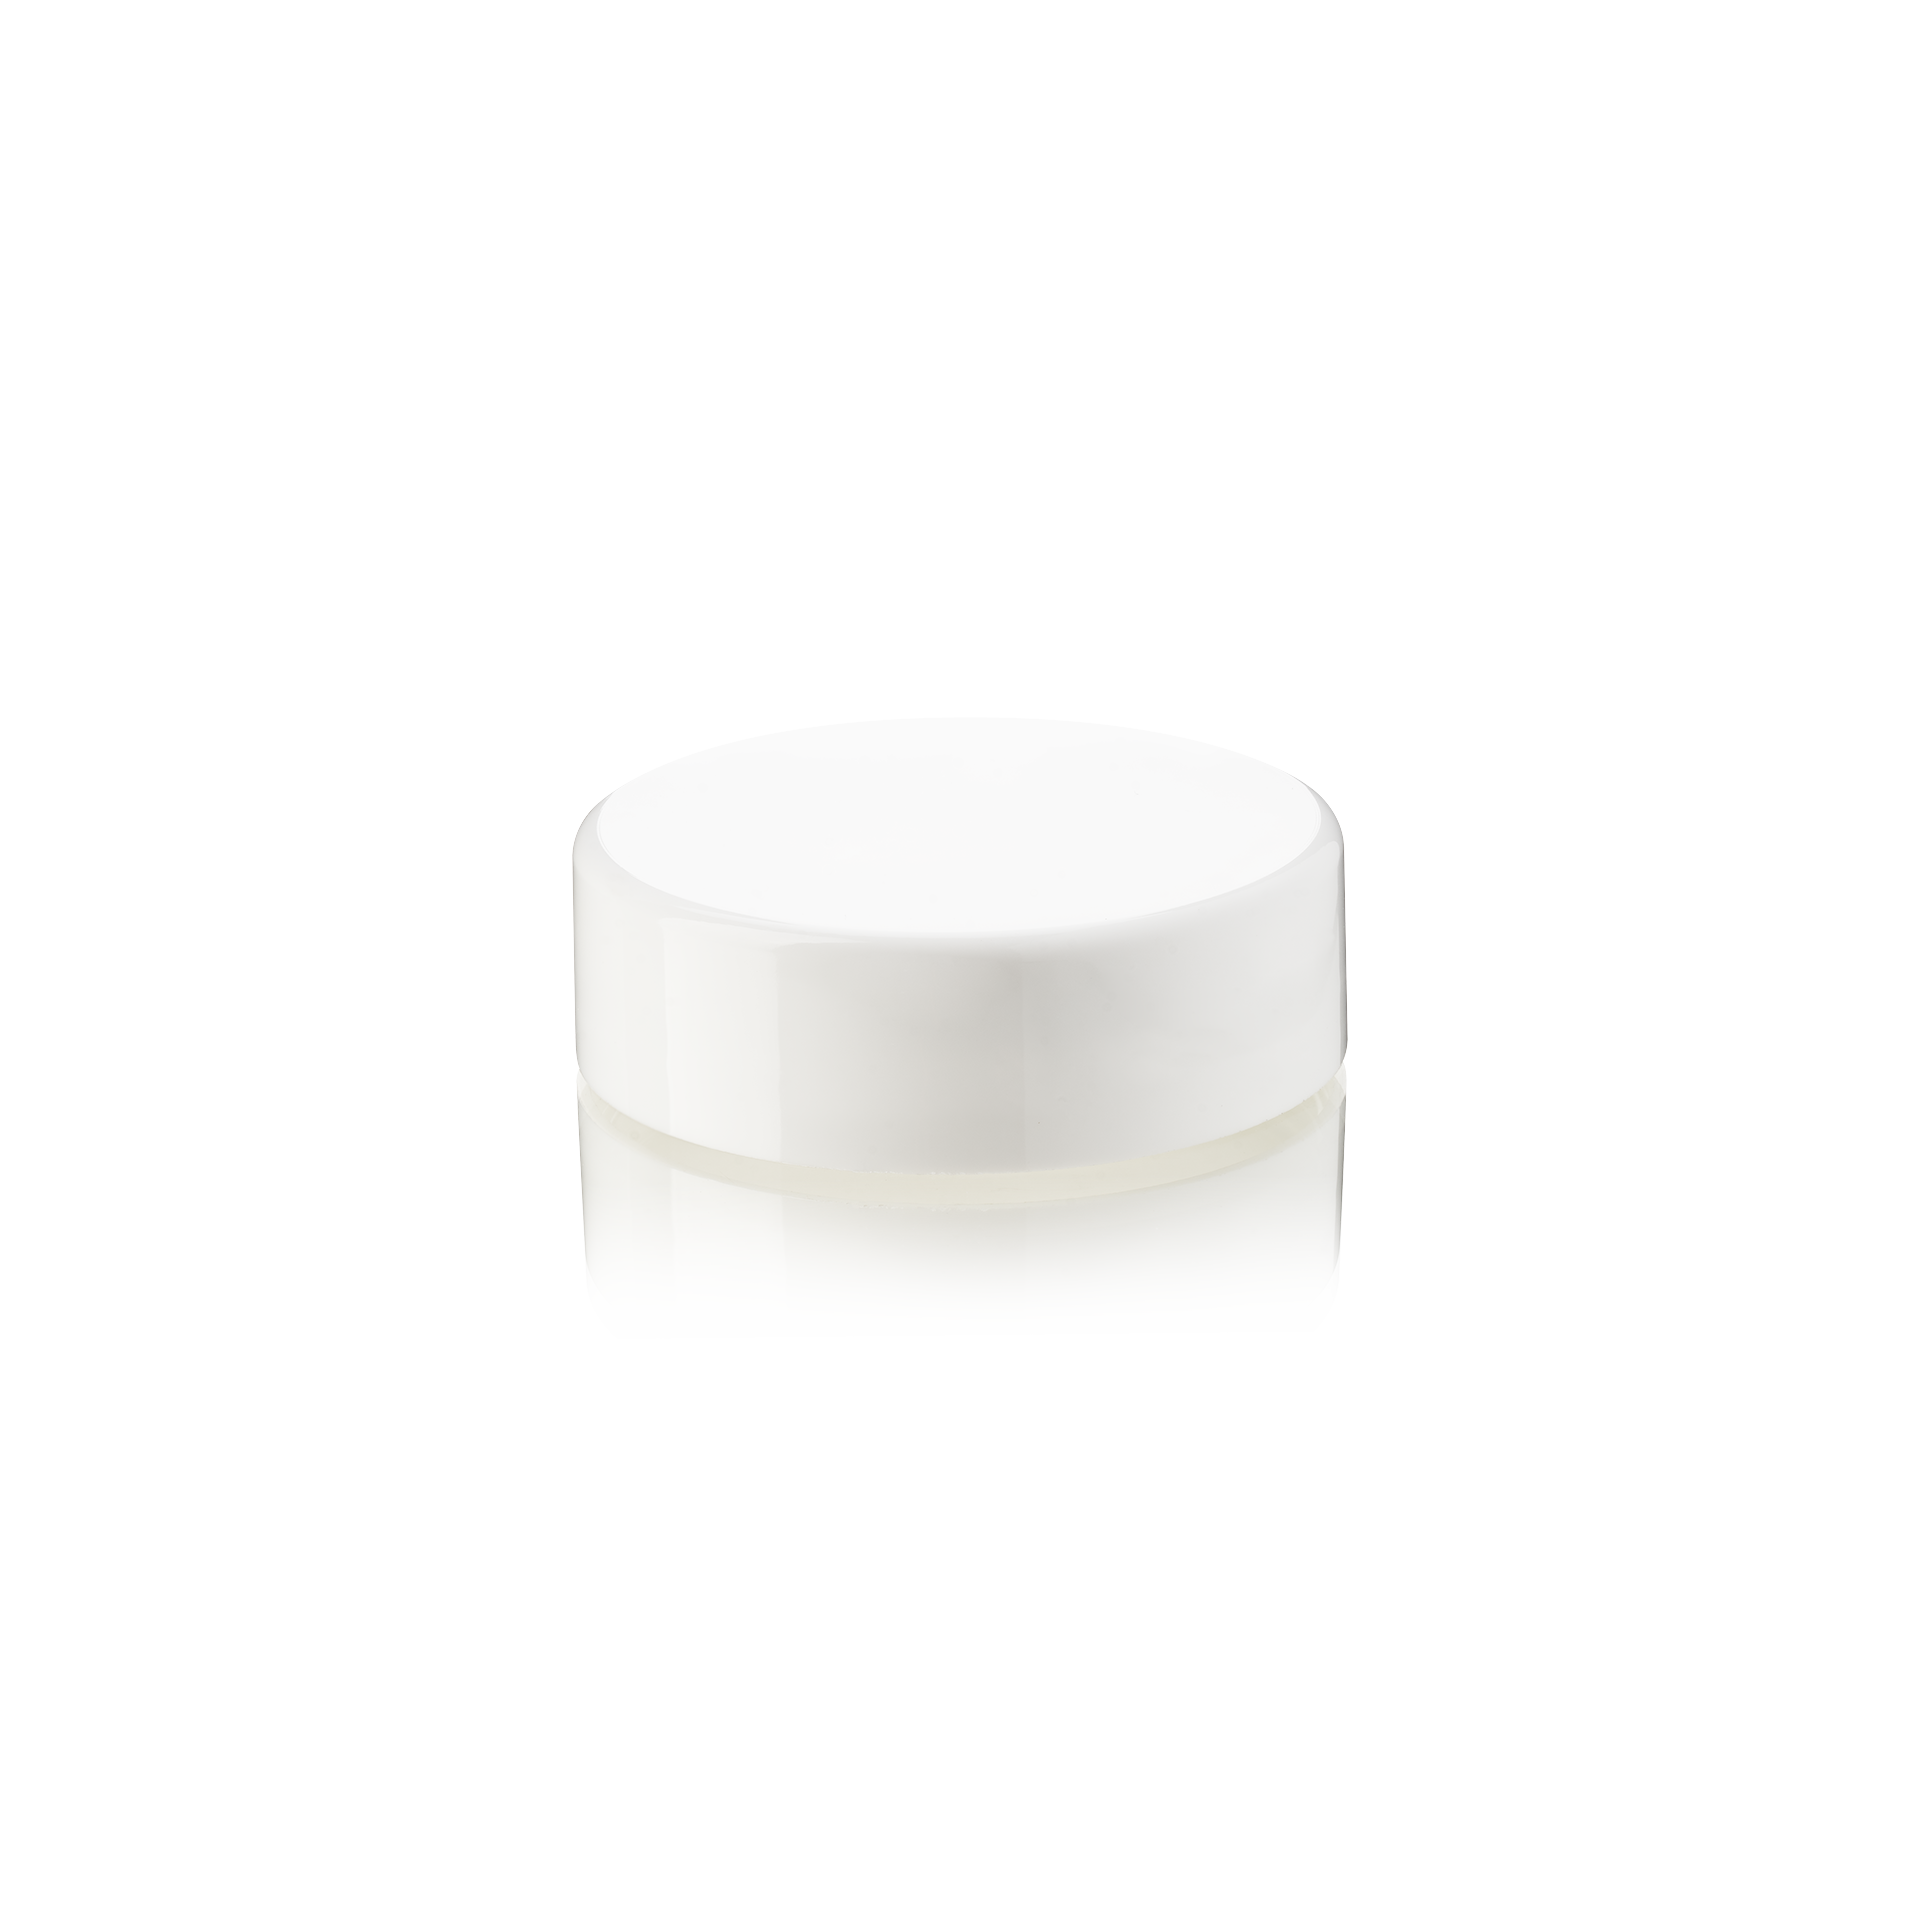 Lid Modern 48 special, PP, white, glossy finish, white inlay (Aspen 50)